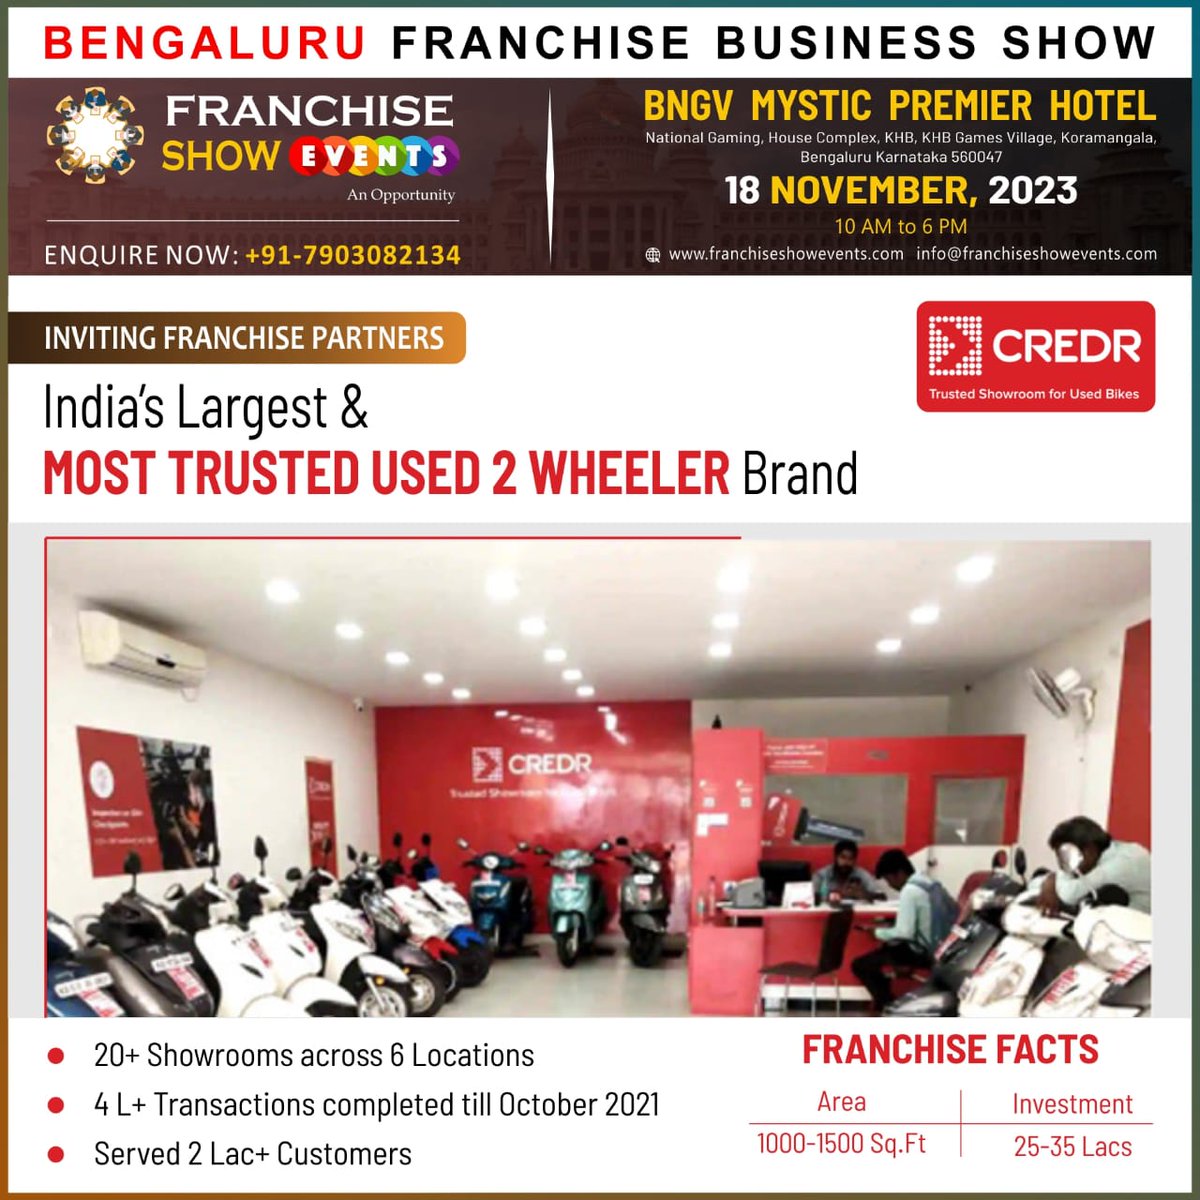 CredR Inviting #FranchisePartners in India

#CredR is India's largest and most trusted used two-wheeler brand.

Meet us at #Bengaluru #FranchiseShow on 18th Nov'23 in Hotel BNGV Mystic Premier from 10 AM to 6 PM.